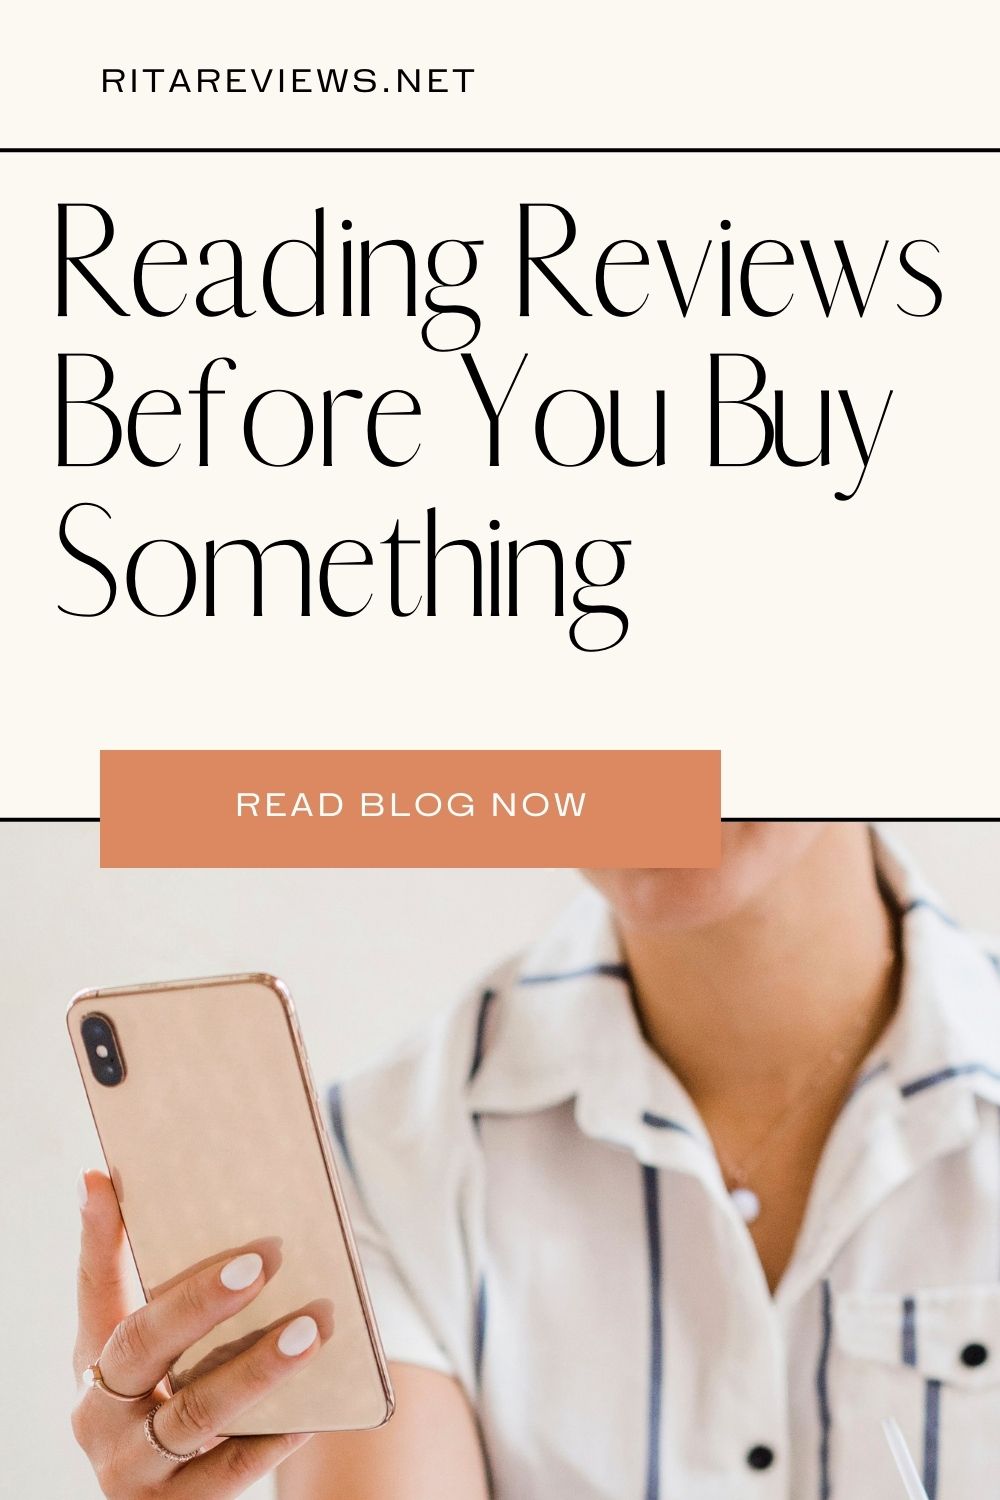 Importance of Reading Reviews Before You Buy Something